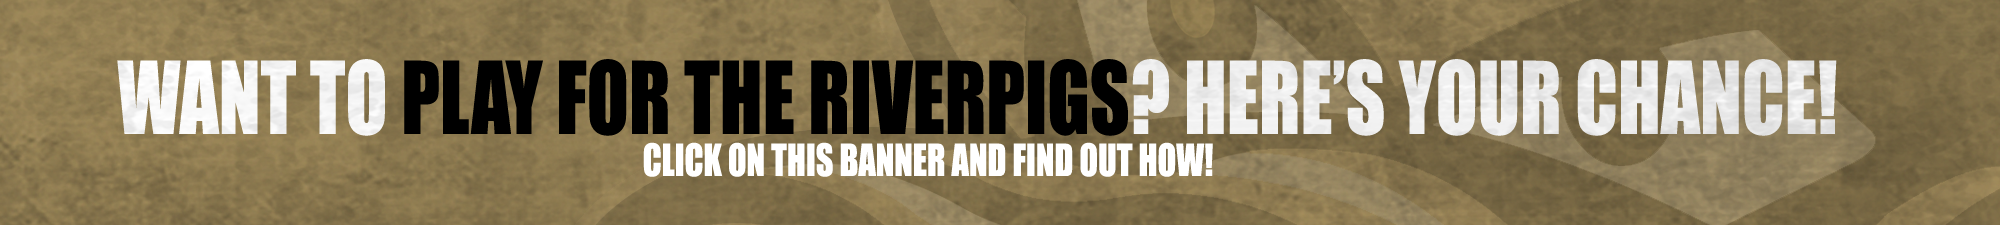 Website-Middle-Ad-Want-to-play-for-riverpigs